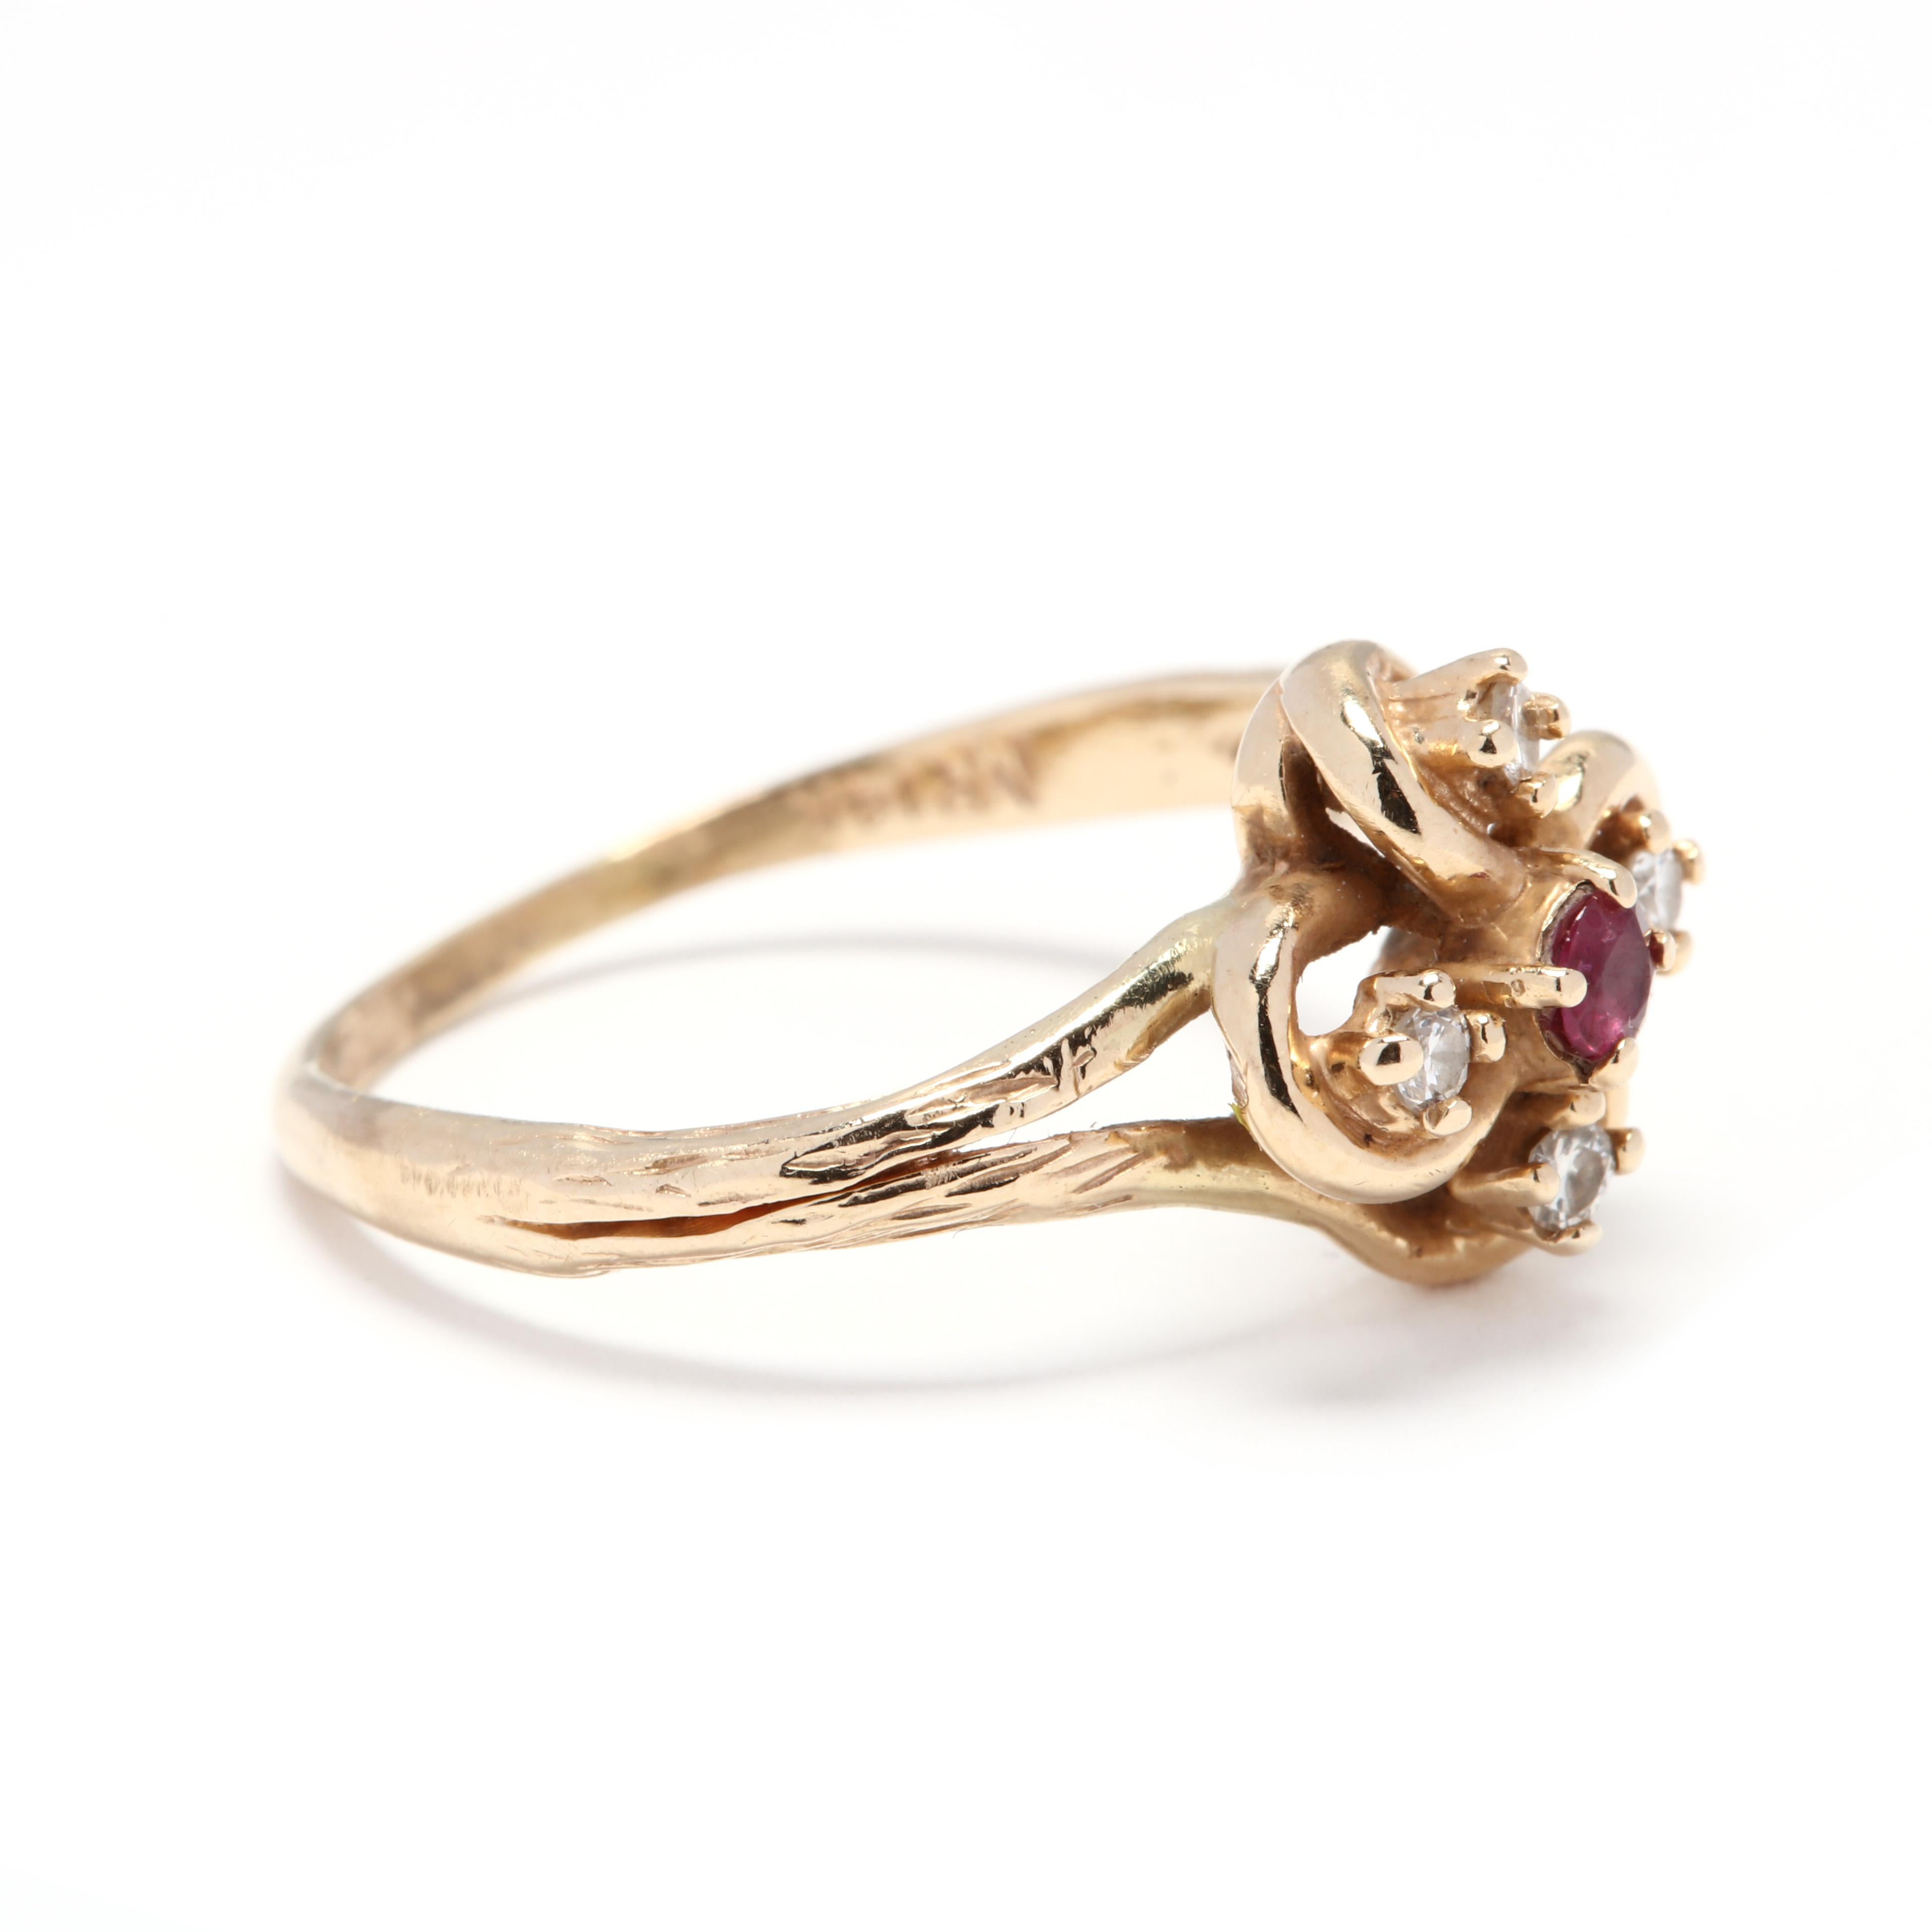 A 14 karat yellow gold, ruby and diamond flower ring. In an open flower motif design set with a round cut ruby center stone surrounded by four round cut diamonds weighing approximately .08 total carats and a textured split shank.

Stones:
- ruby, 1